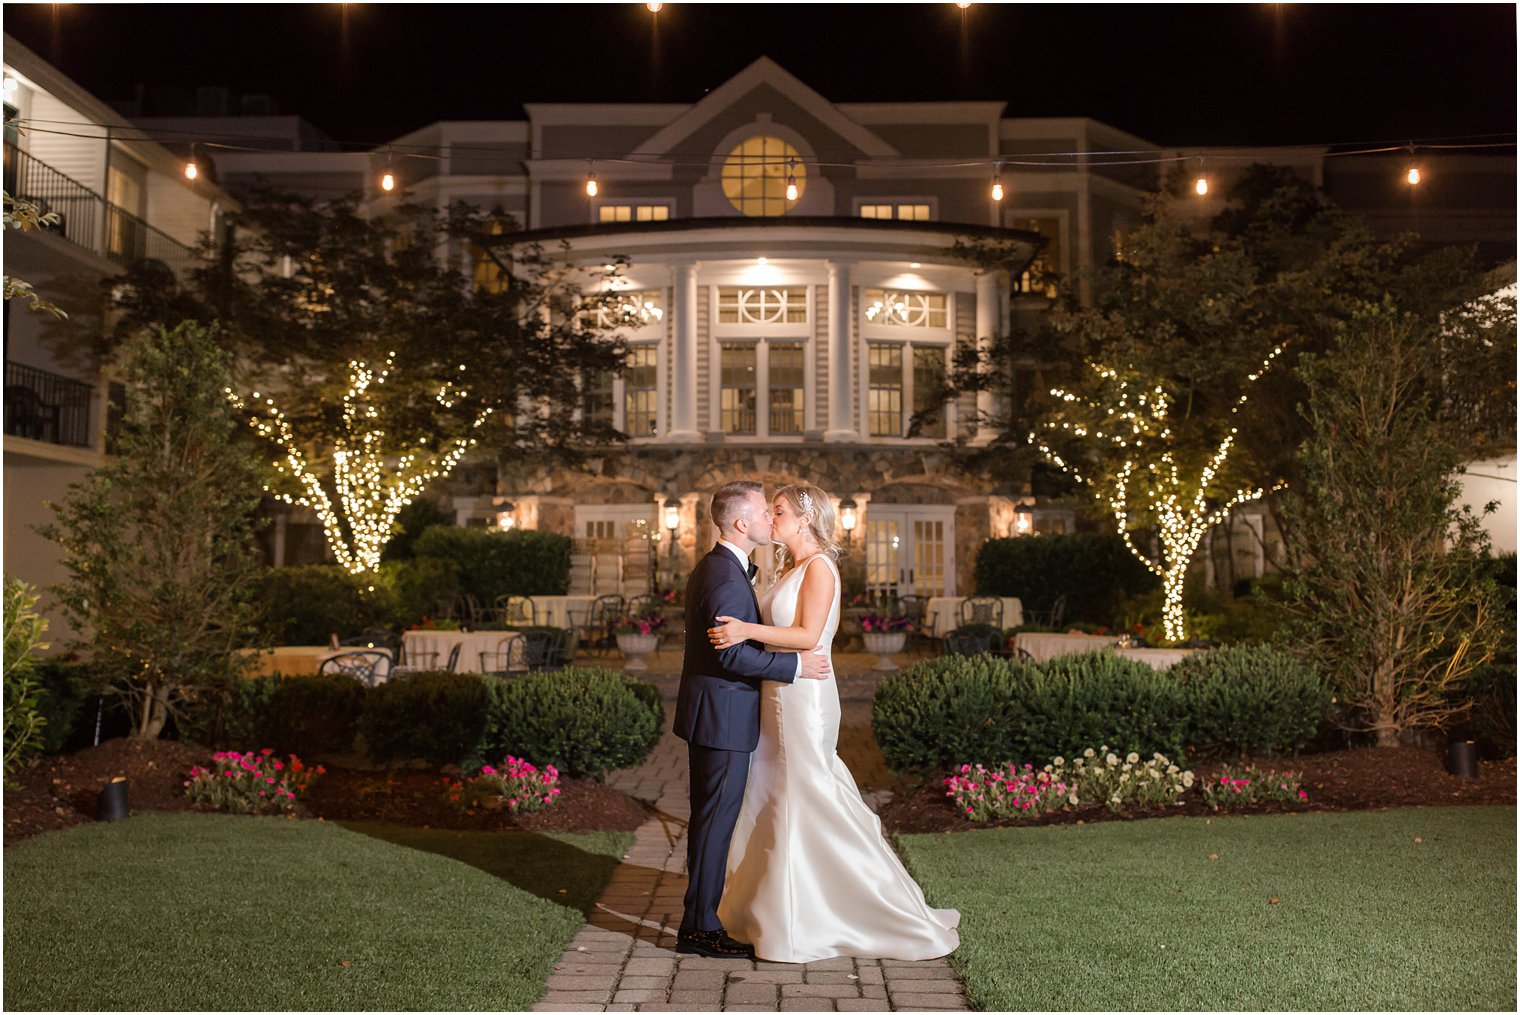 night photo of bride and groom at Olde Mill Inn